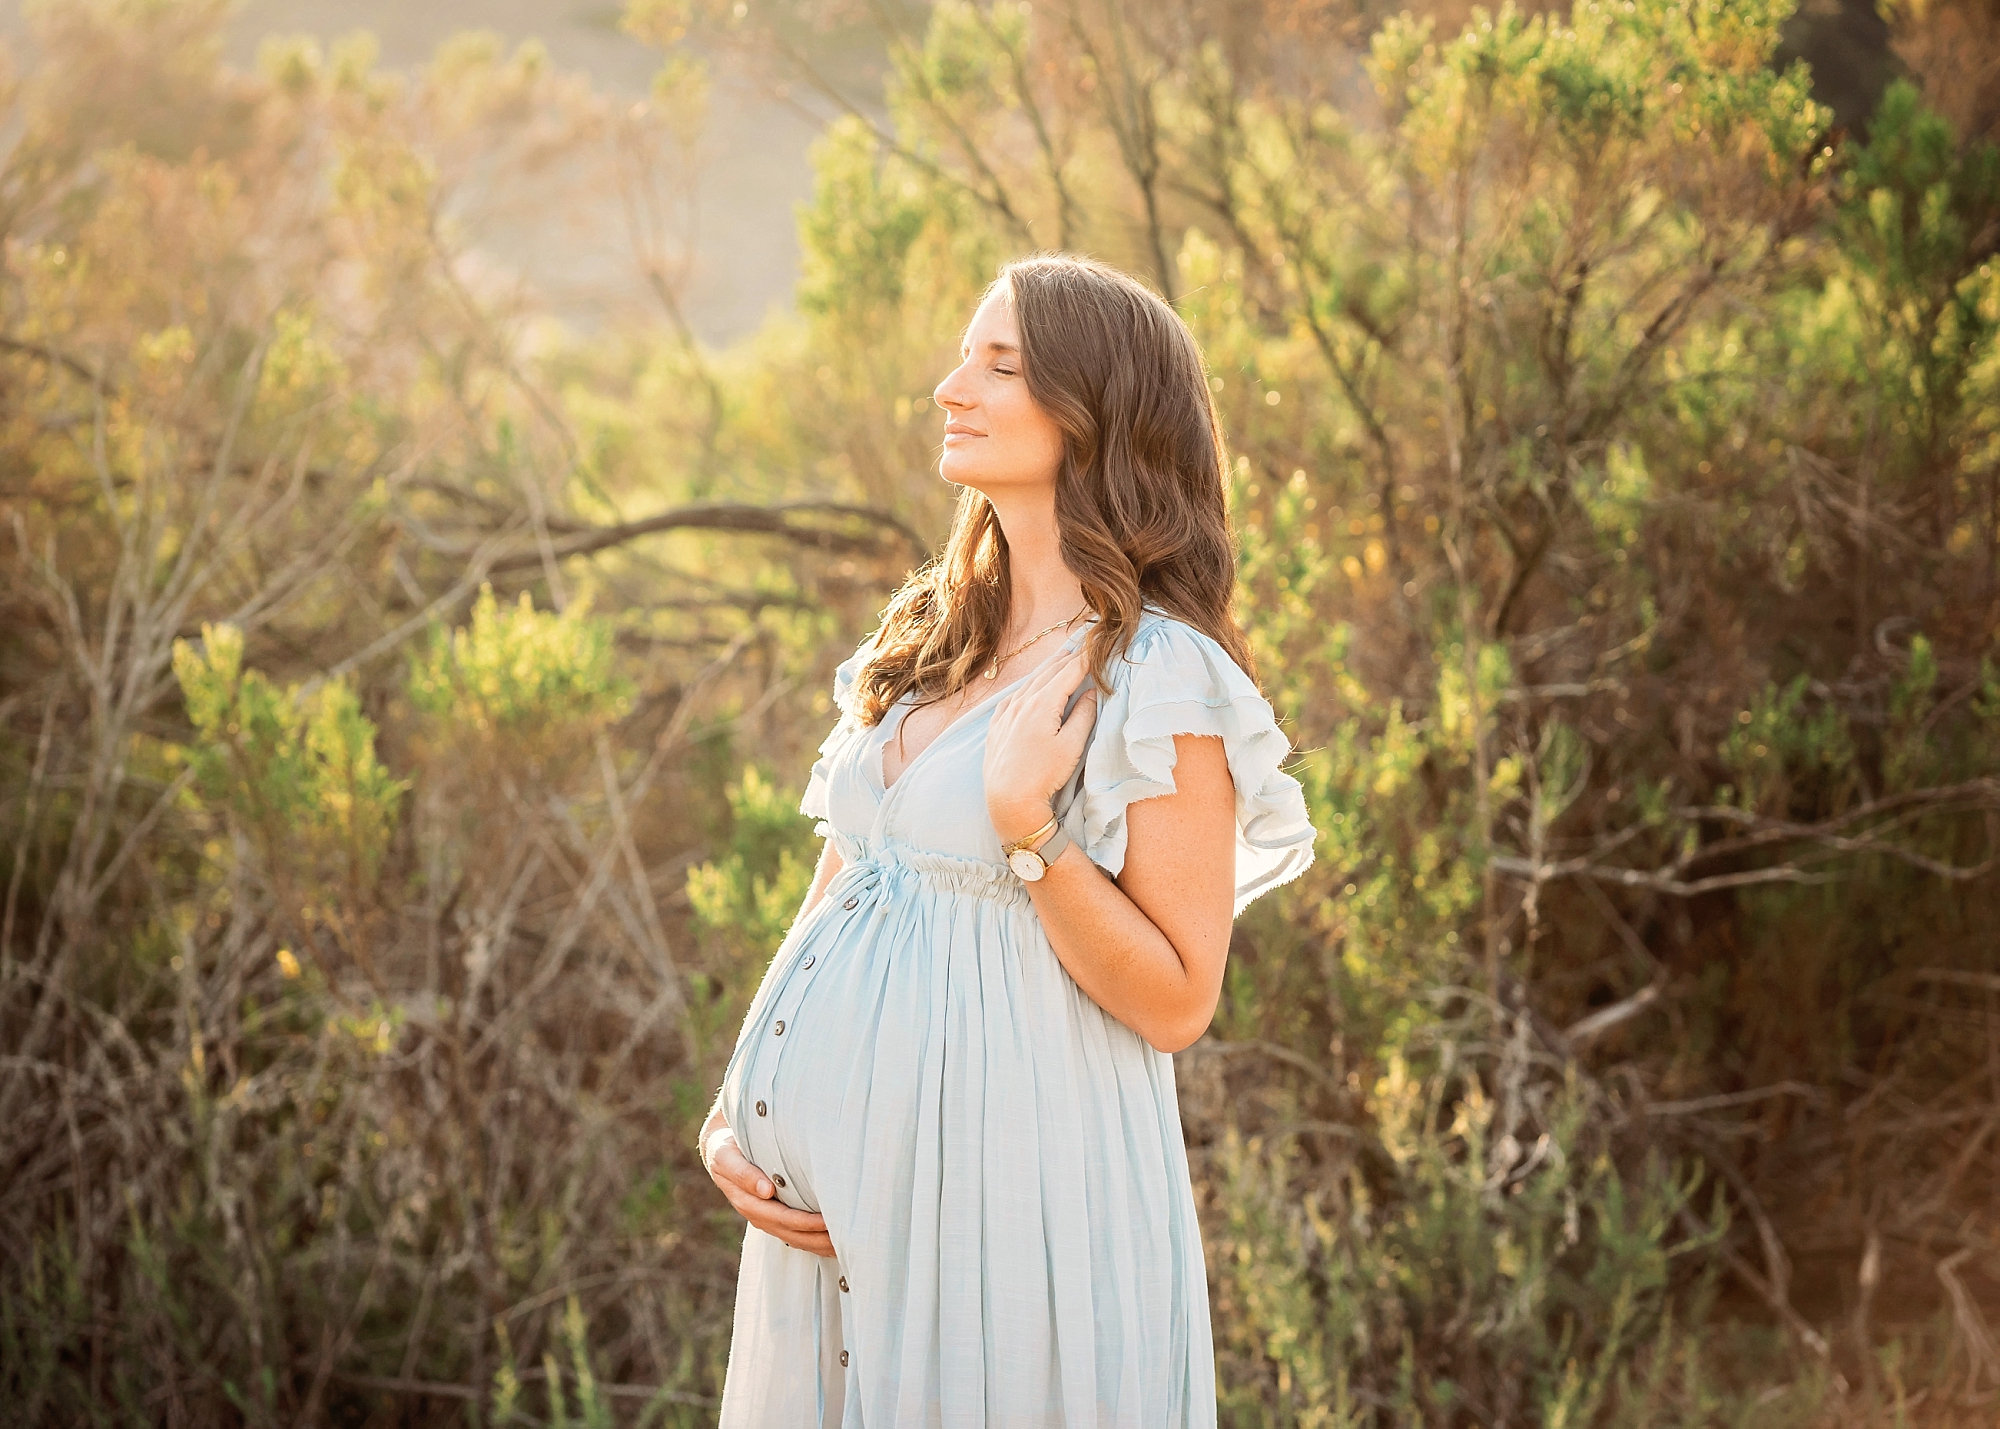 Maternity photographer near me in SoCal